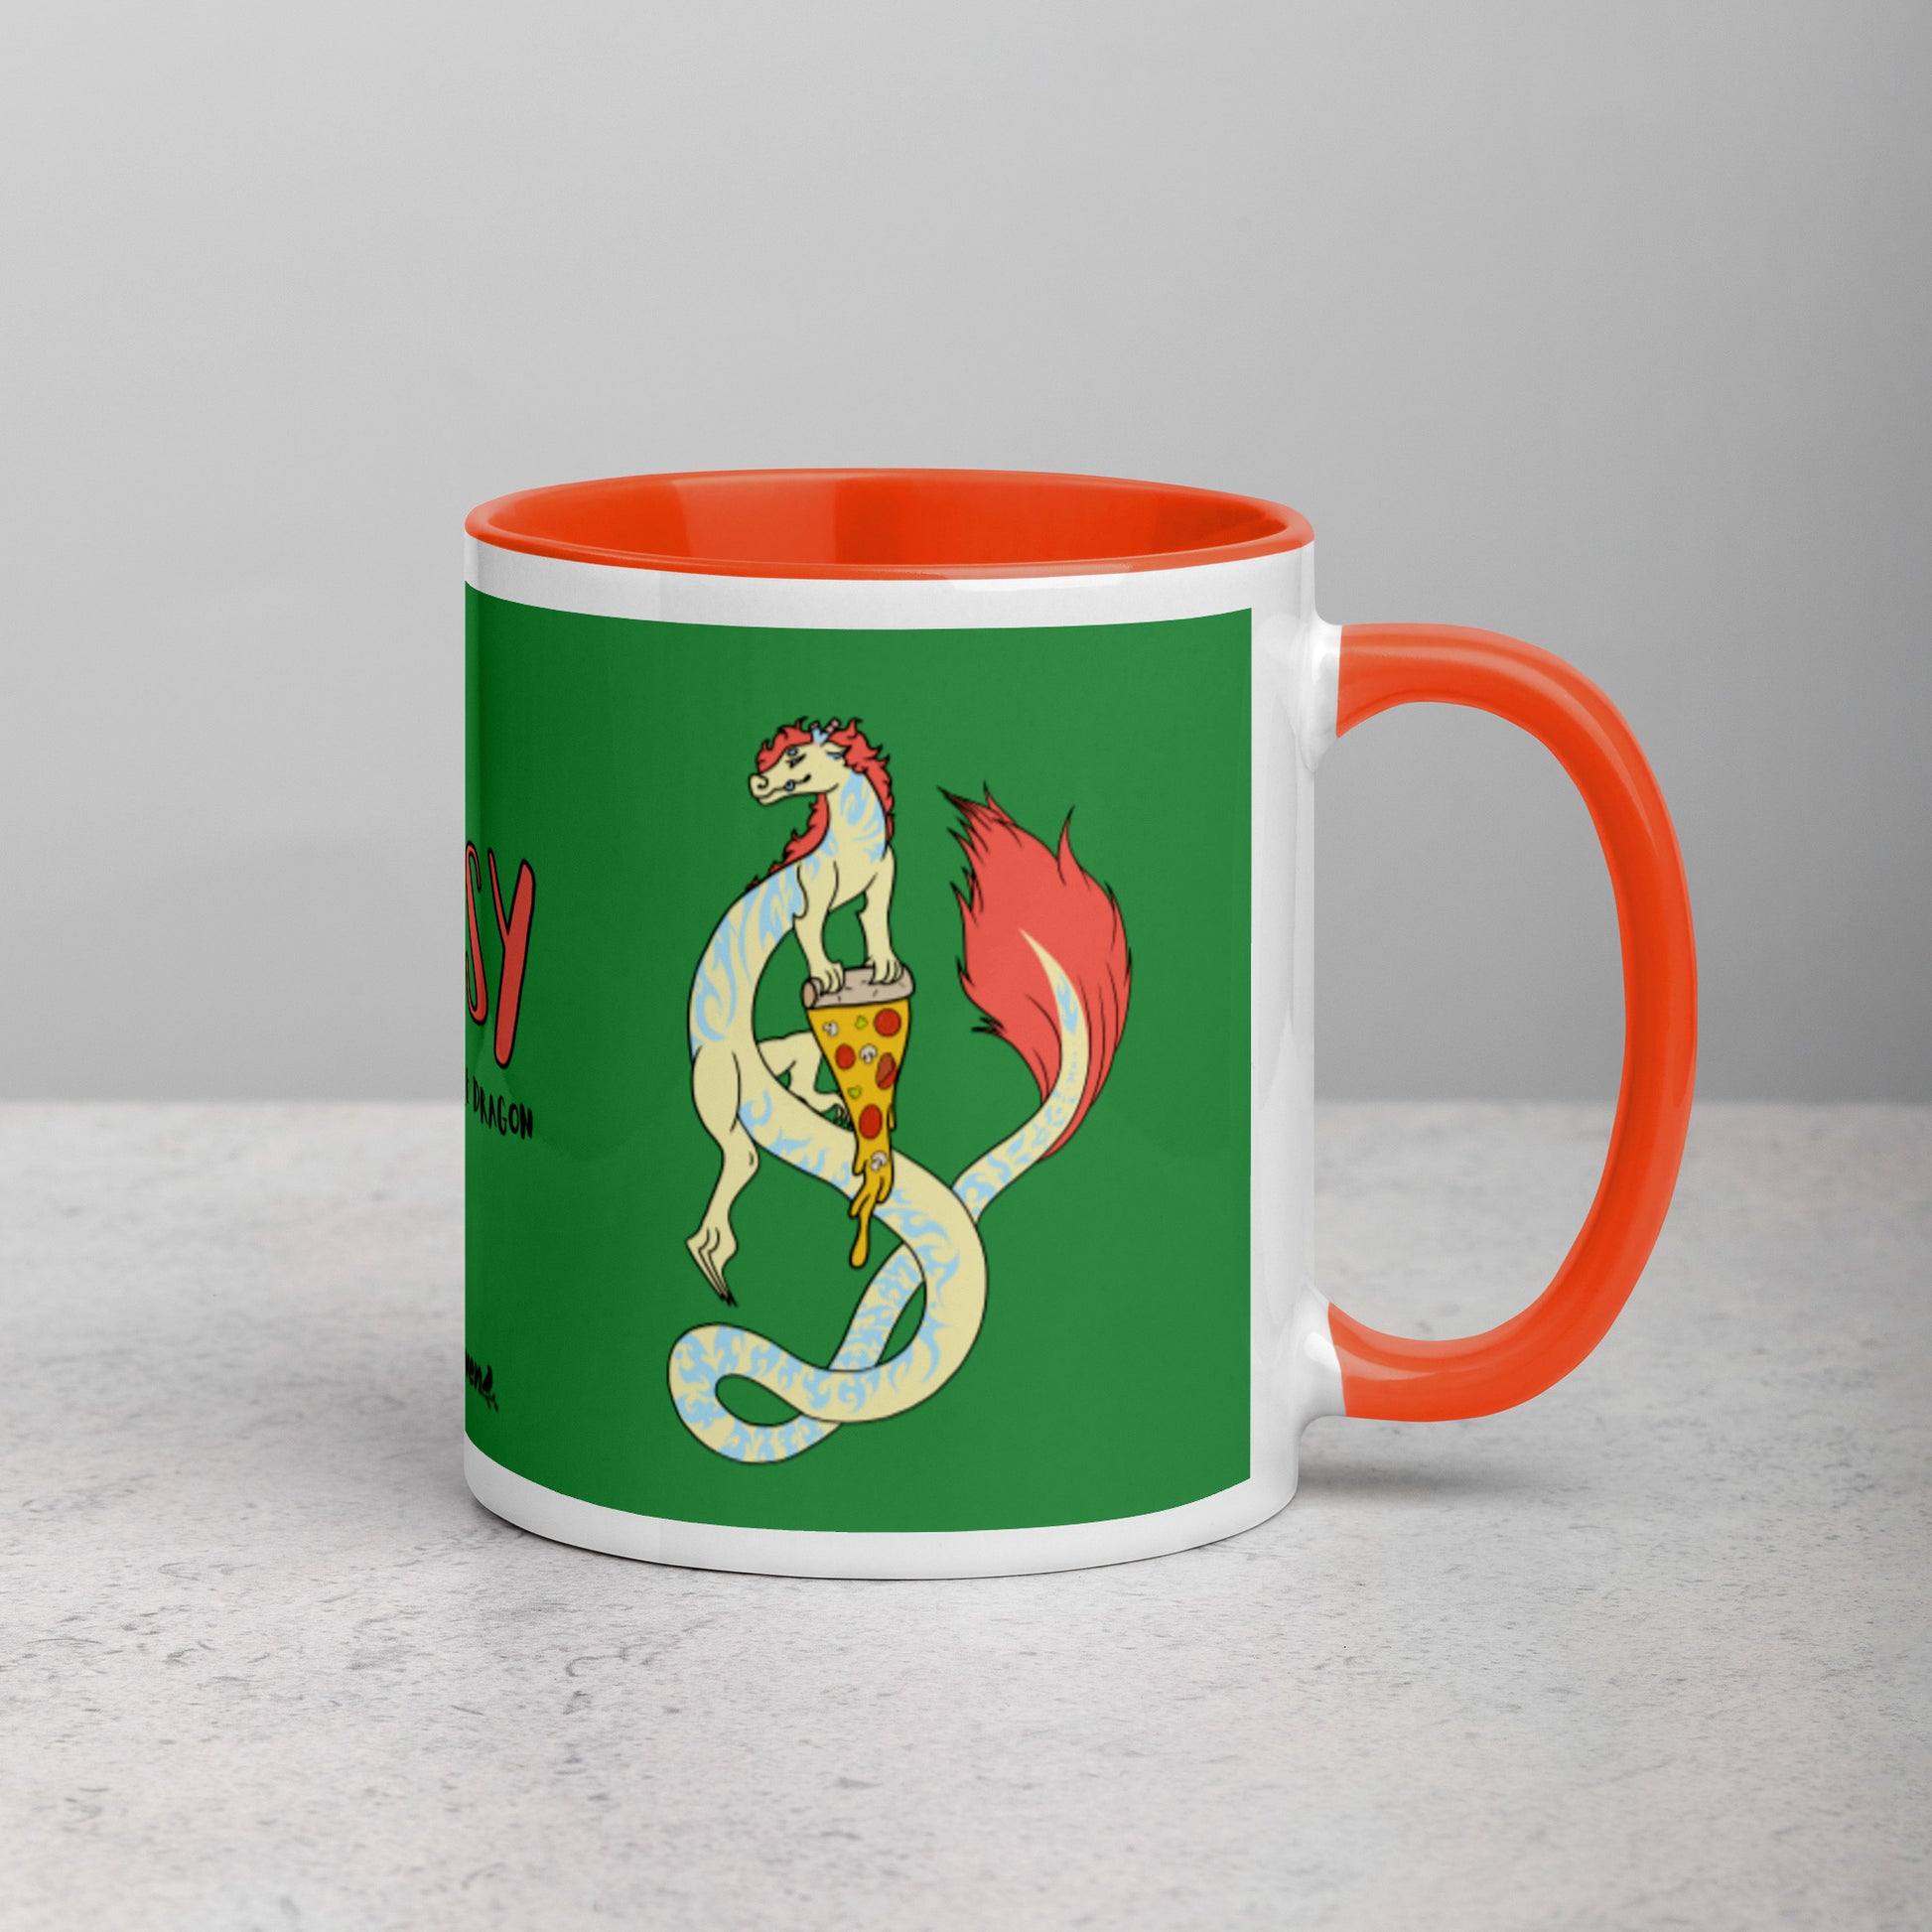 11 ounce white ceramic mug. Orange inside and handle. Features double-sided image of Maisy the Fuzzy Noodle Dragon with a slice of pizza. Shown on tabletop with handle facing right.